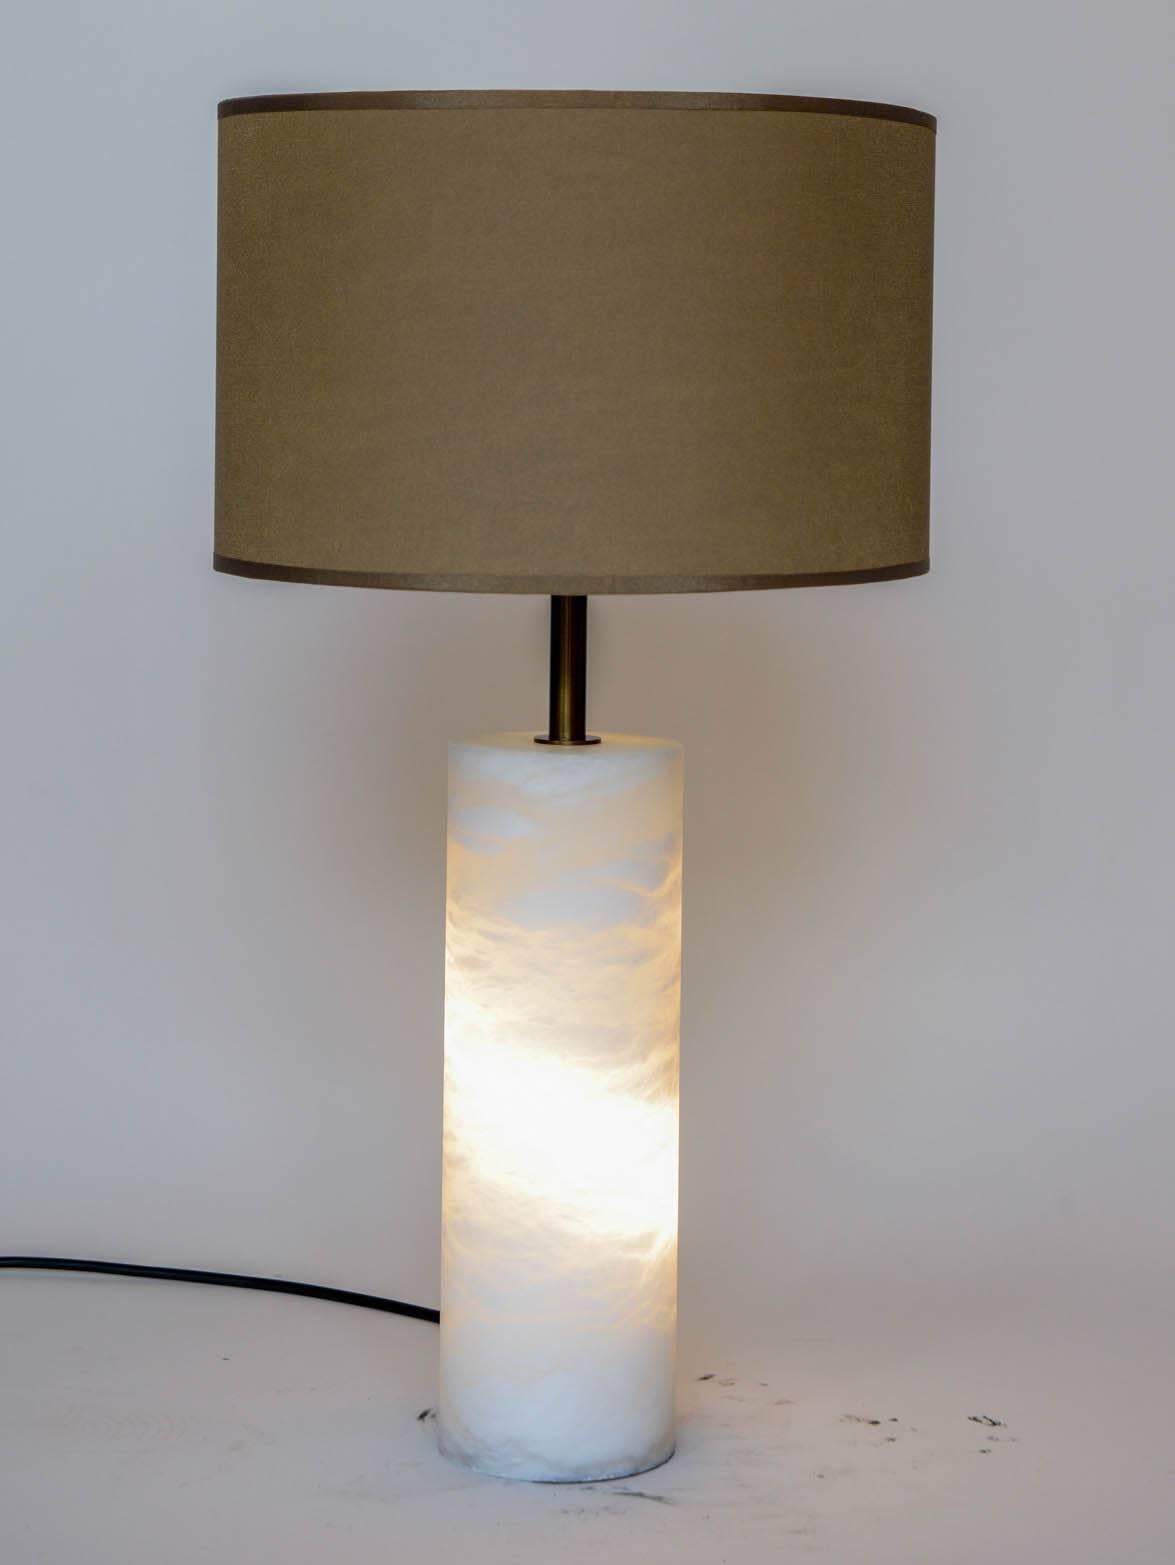 New design by Glustin Luminaires, pair of table lamps made of a hollow alabaster cylinder and brass setting. Two different set of lights, one in the cylinder and one bulb at the top that can be turn on separately.